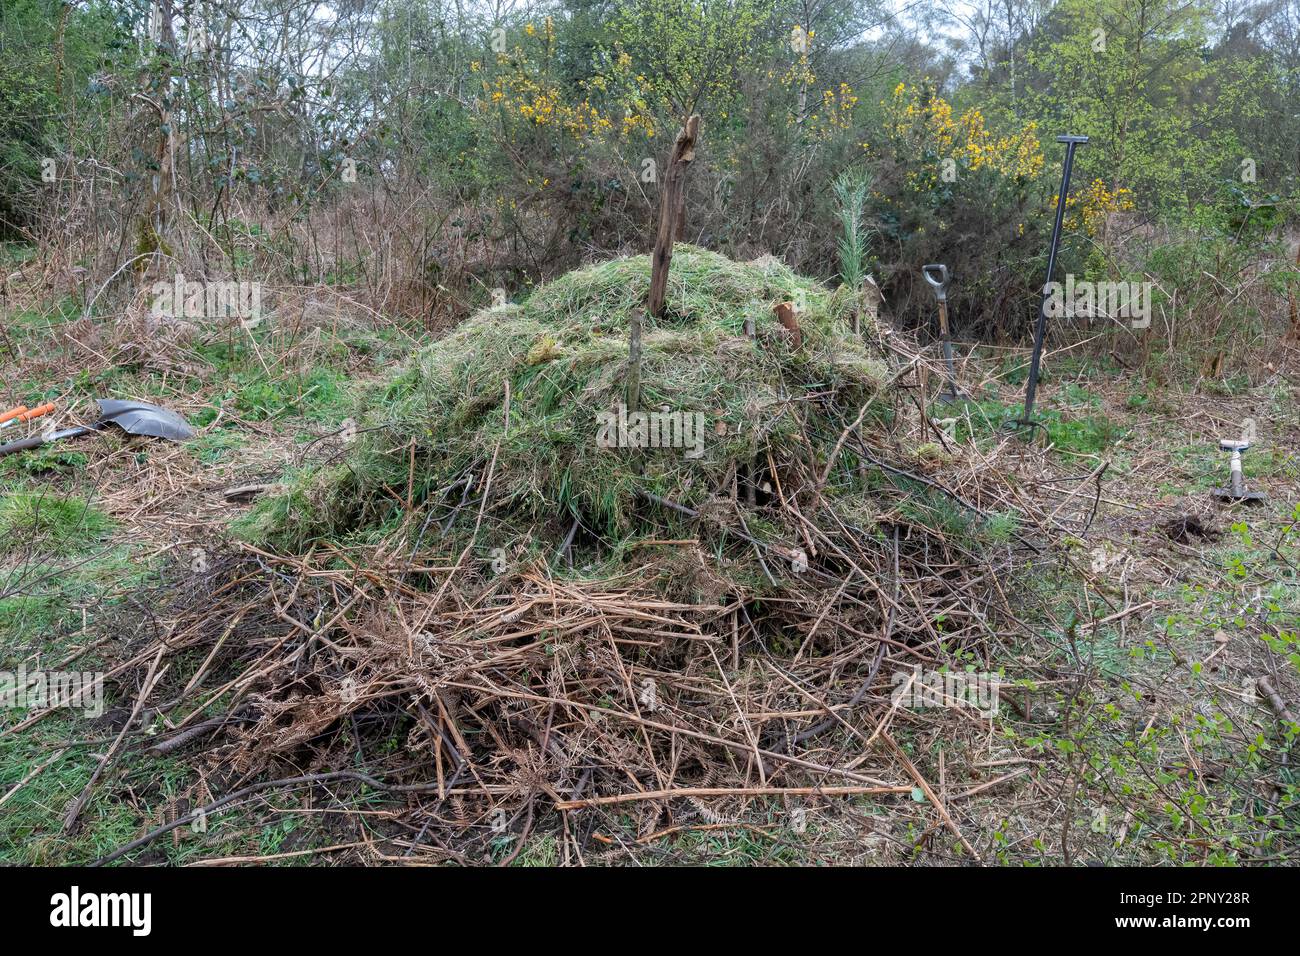 Grass snake pile for Natrix helvetica snakes to lay eggs, England, UK, made of cut branches, grass and manure Stock Photo